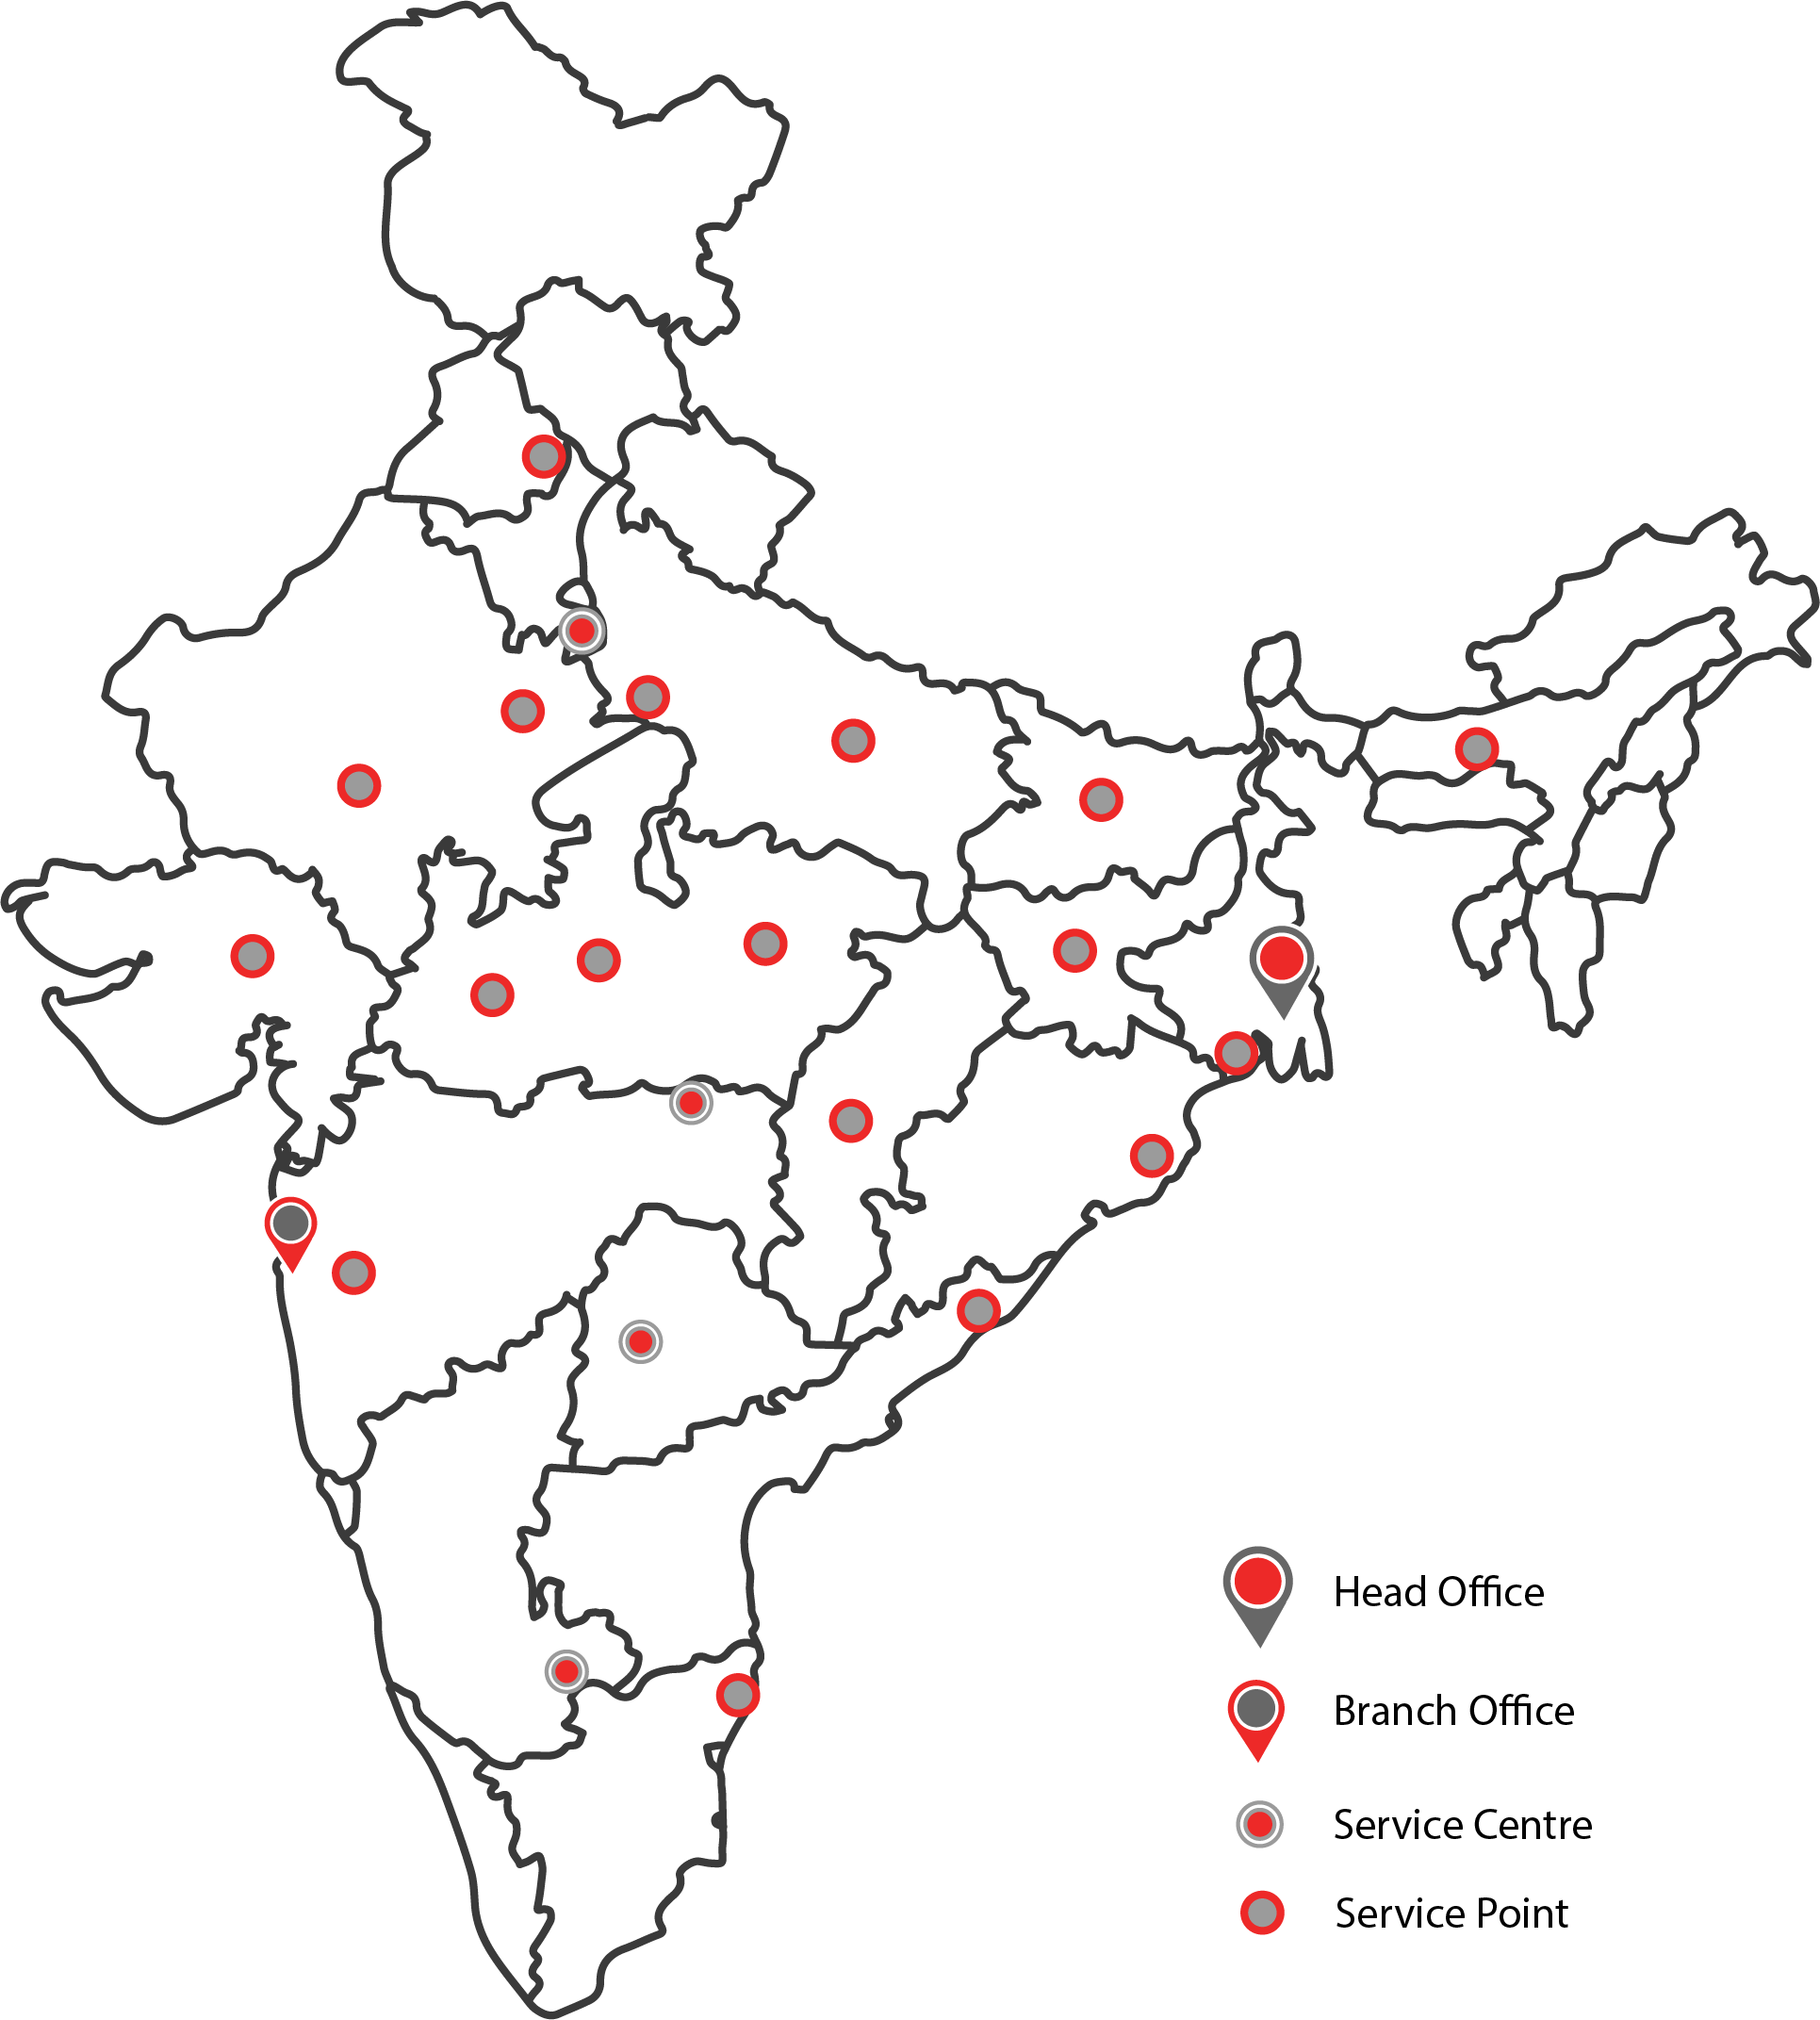 All-India Service Network